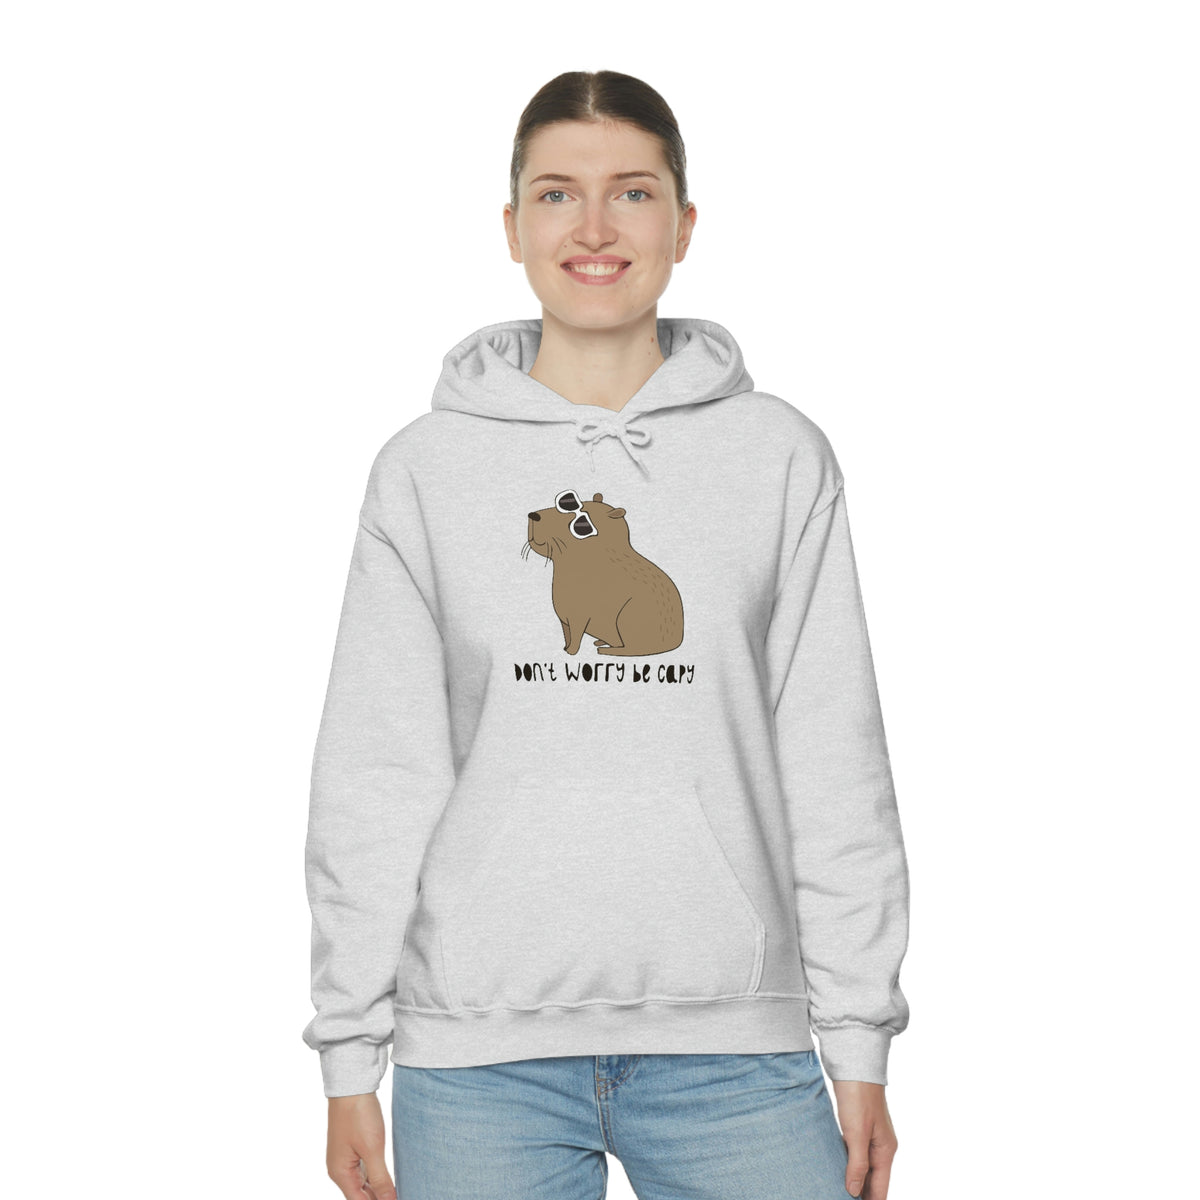 Don't worry BE capy - Unisex Hoodie